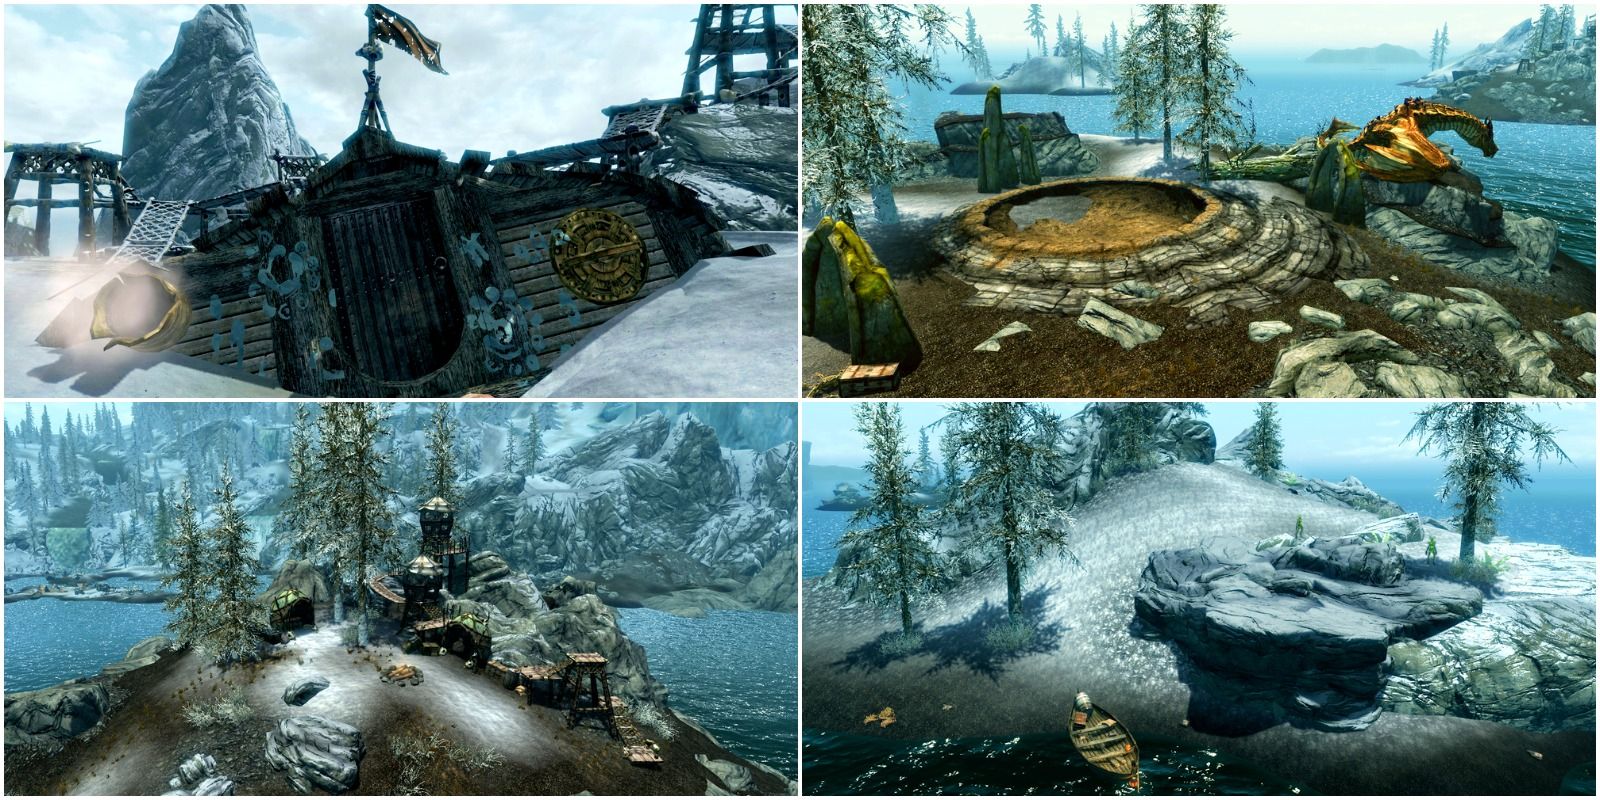 top left: dwarven flip ship crash. top right: dragon on an island. bottom right: island with giant nirnroot. bottom left: island with riekling structures